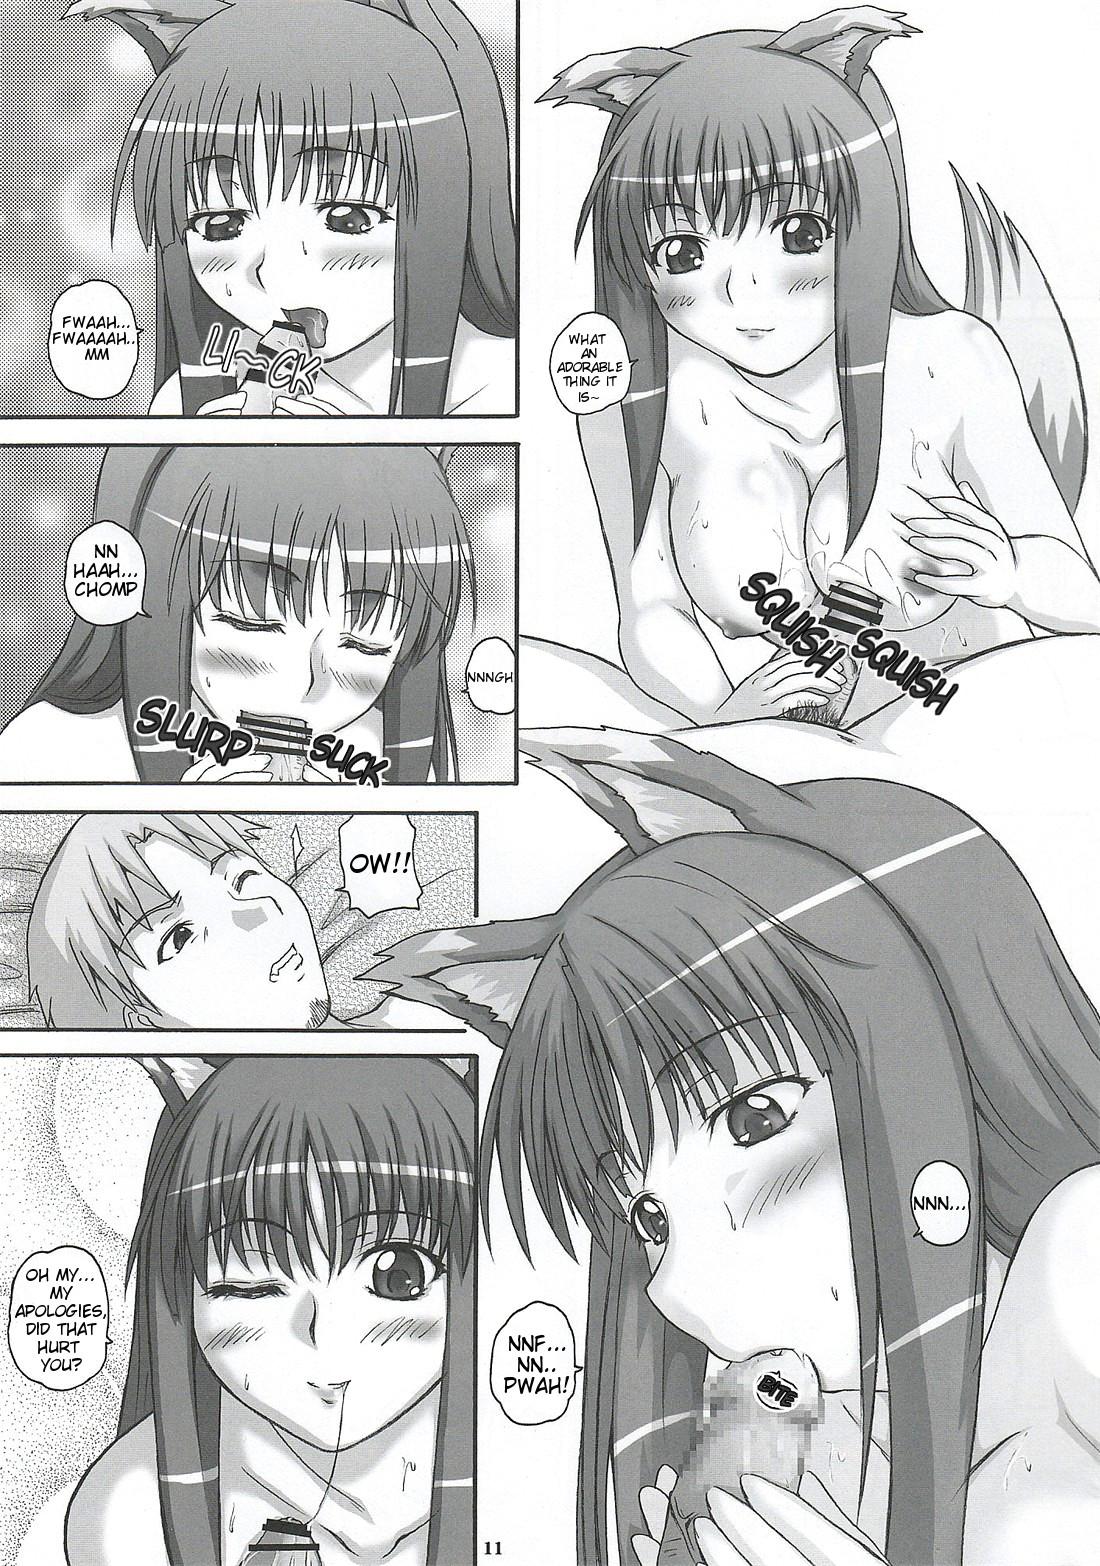 Deepthroat 2Stroke TY - Spice and wolf Cams - Page 10